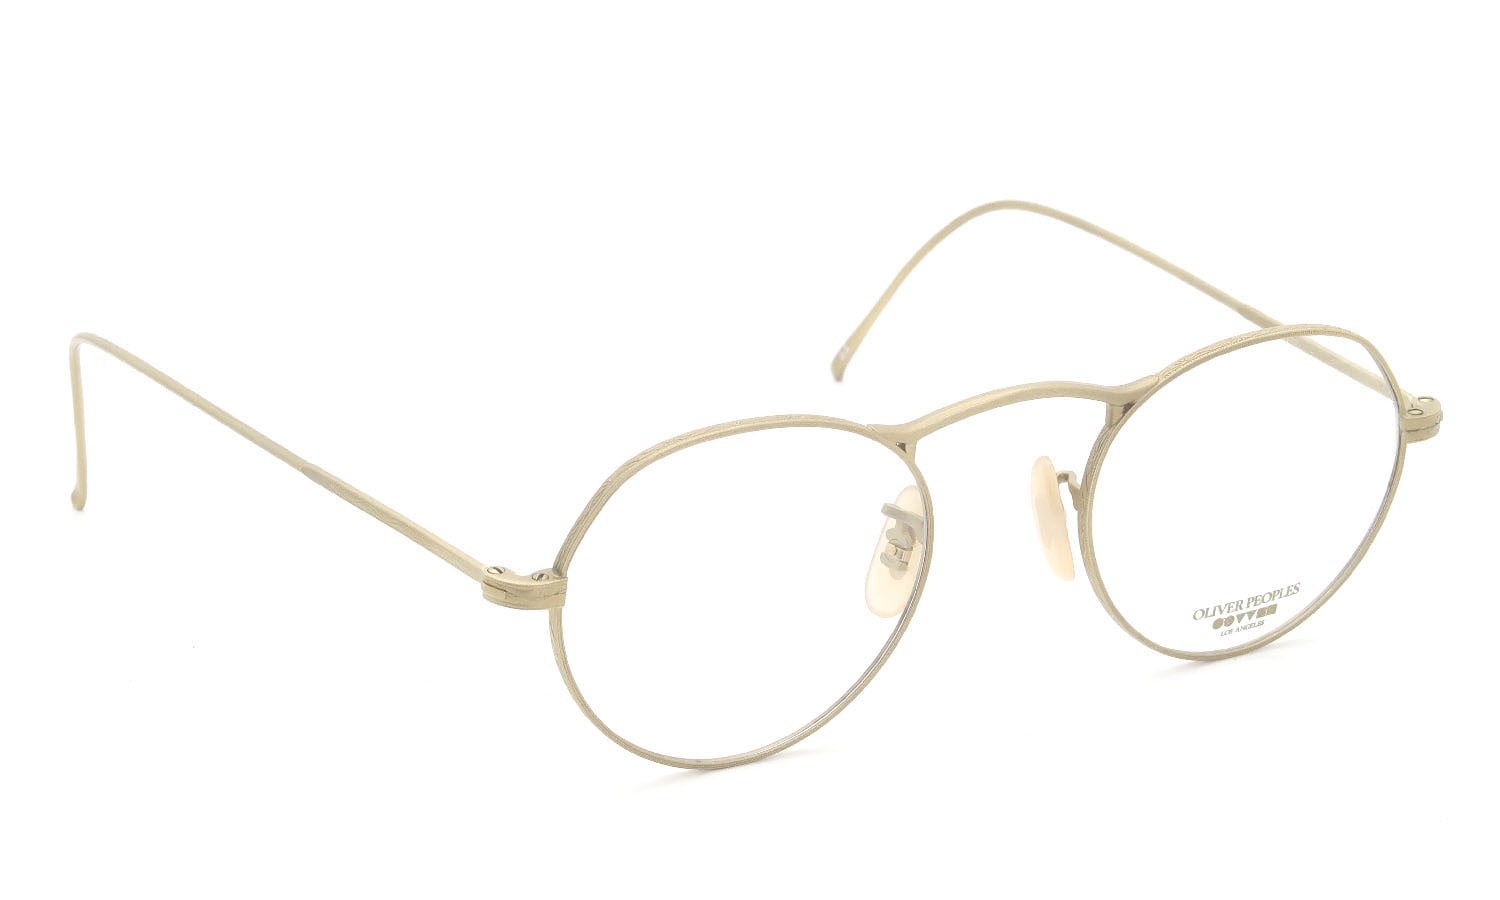 OLIVER PEOPLES archive メガネ通販 初期：M4 44size G (生産：オプテックジャパン期) ポンメガネ